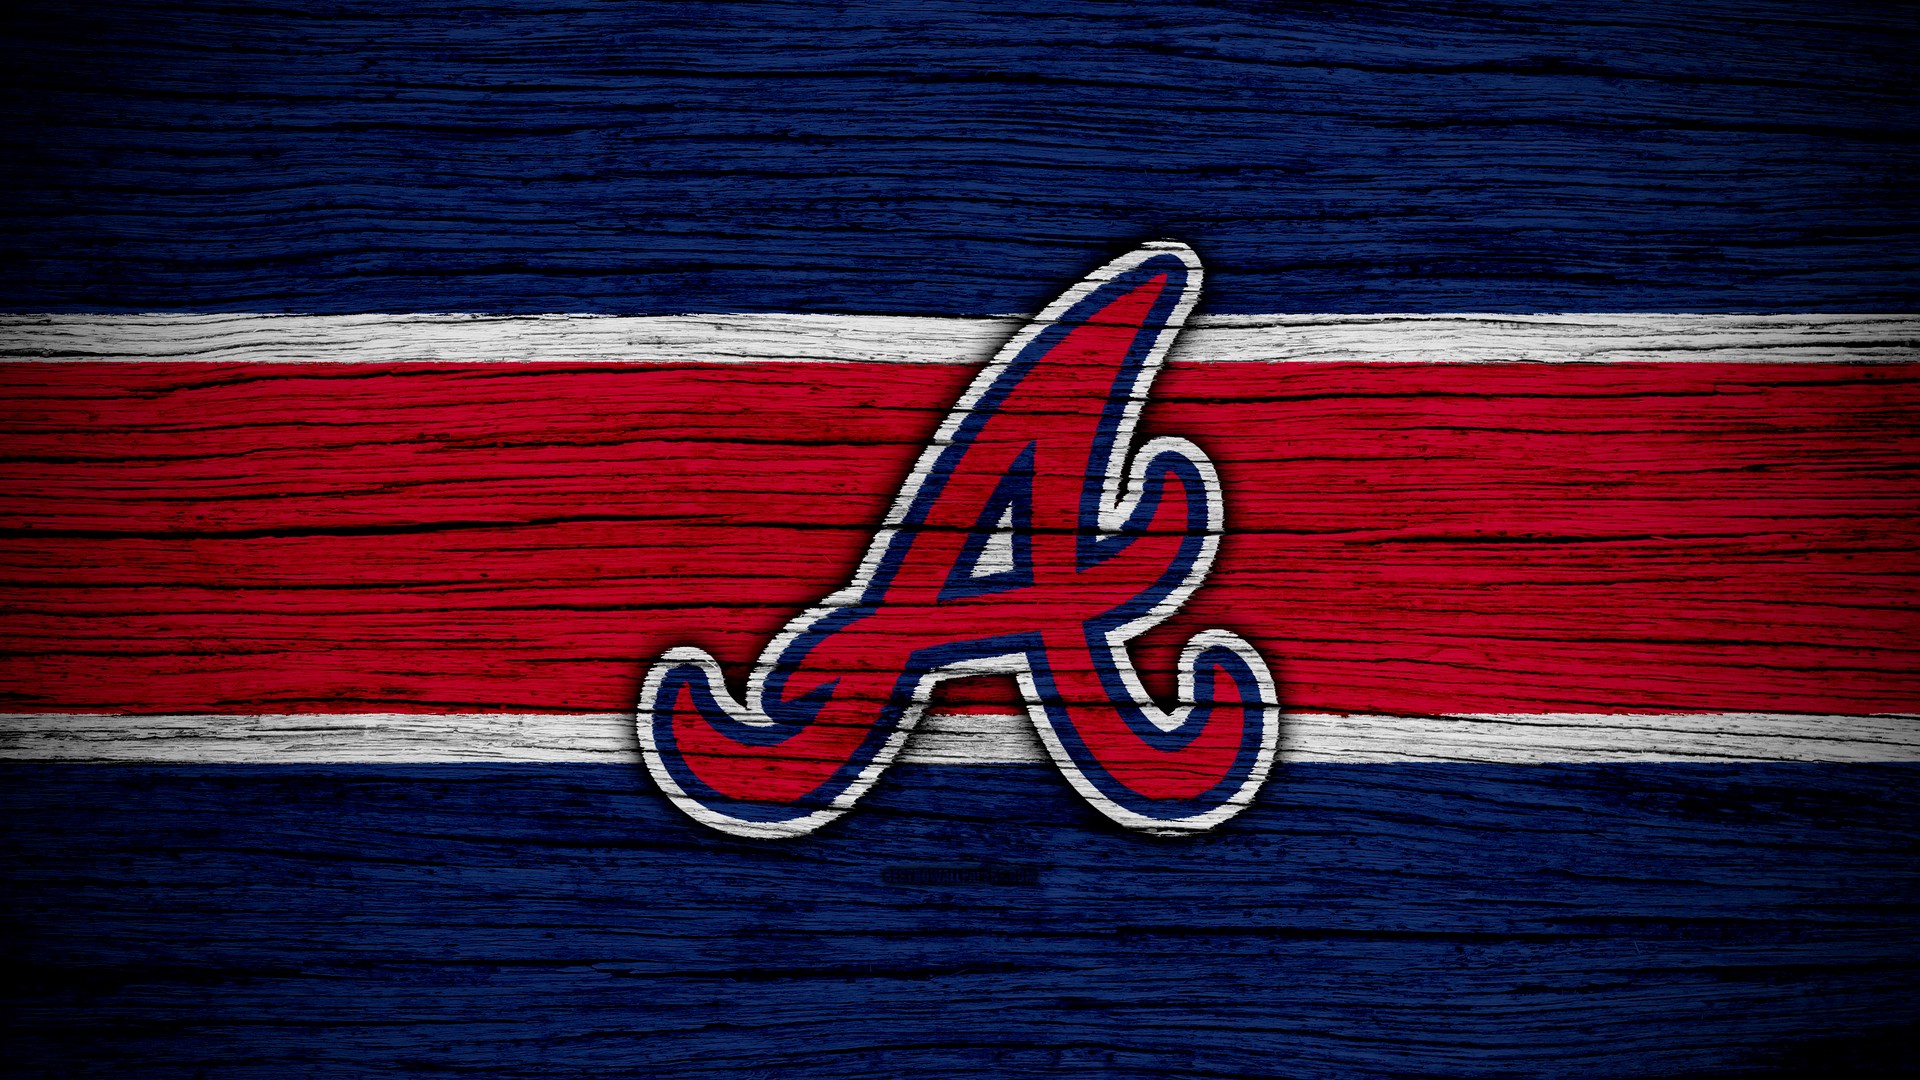 Atlanta Braves Wallpaper HD with high-resolution 1920x1080 pixel. You can use this wallpaper for Mac Desktop Wallpaper, Laptop Screensavers, Android Wallpapers, Tablet or iPhone Home Screen and another mobile phone device